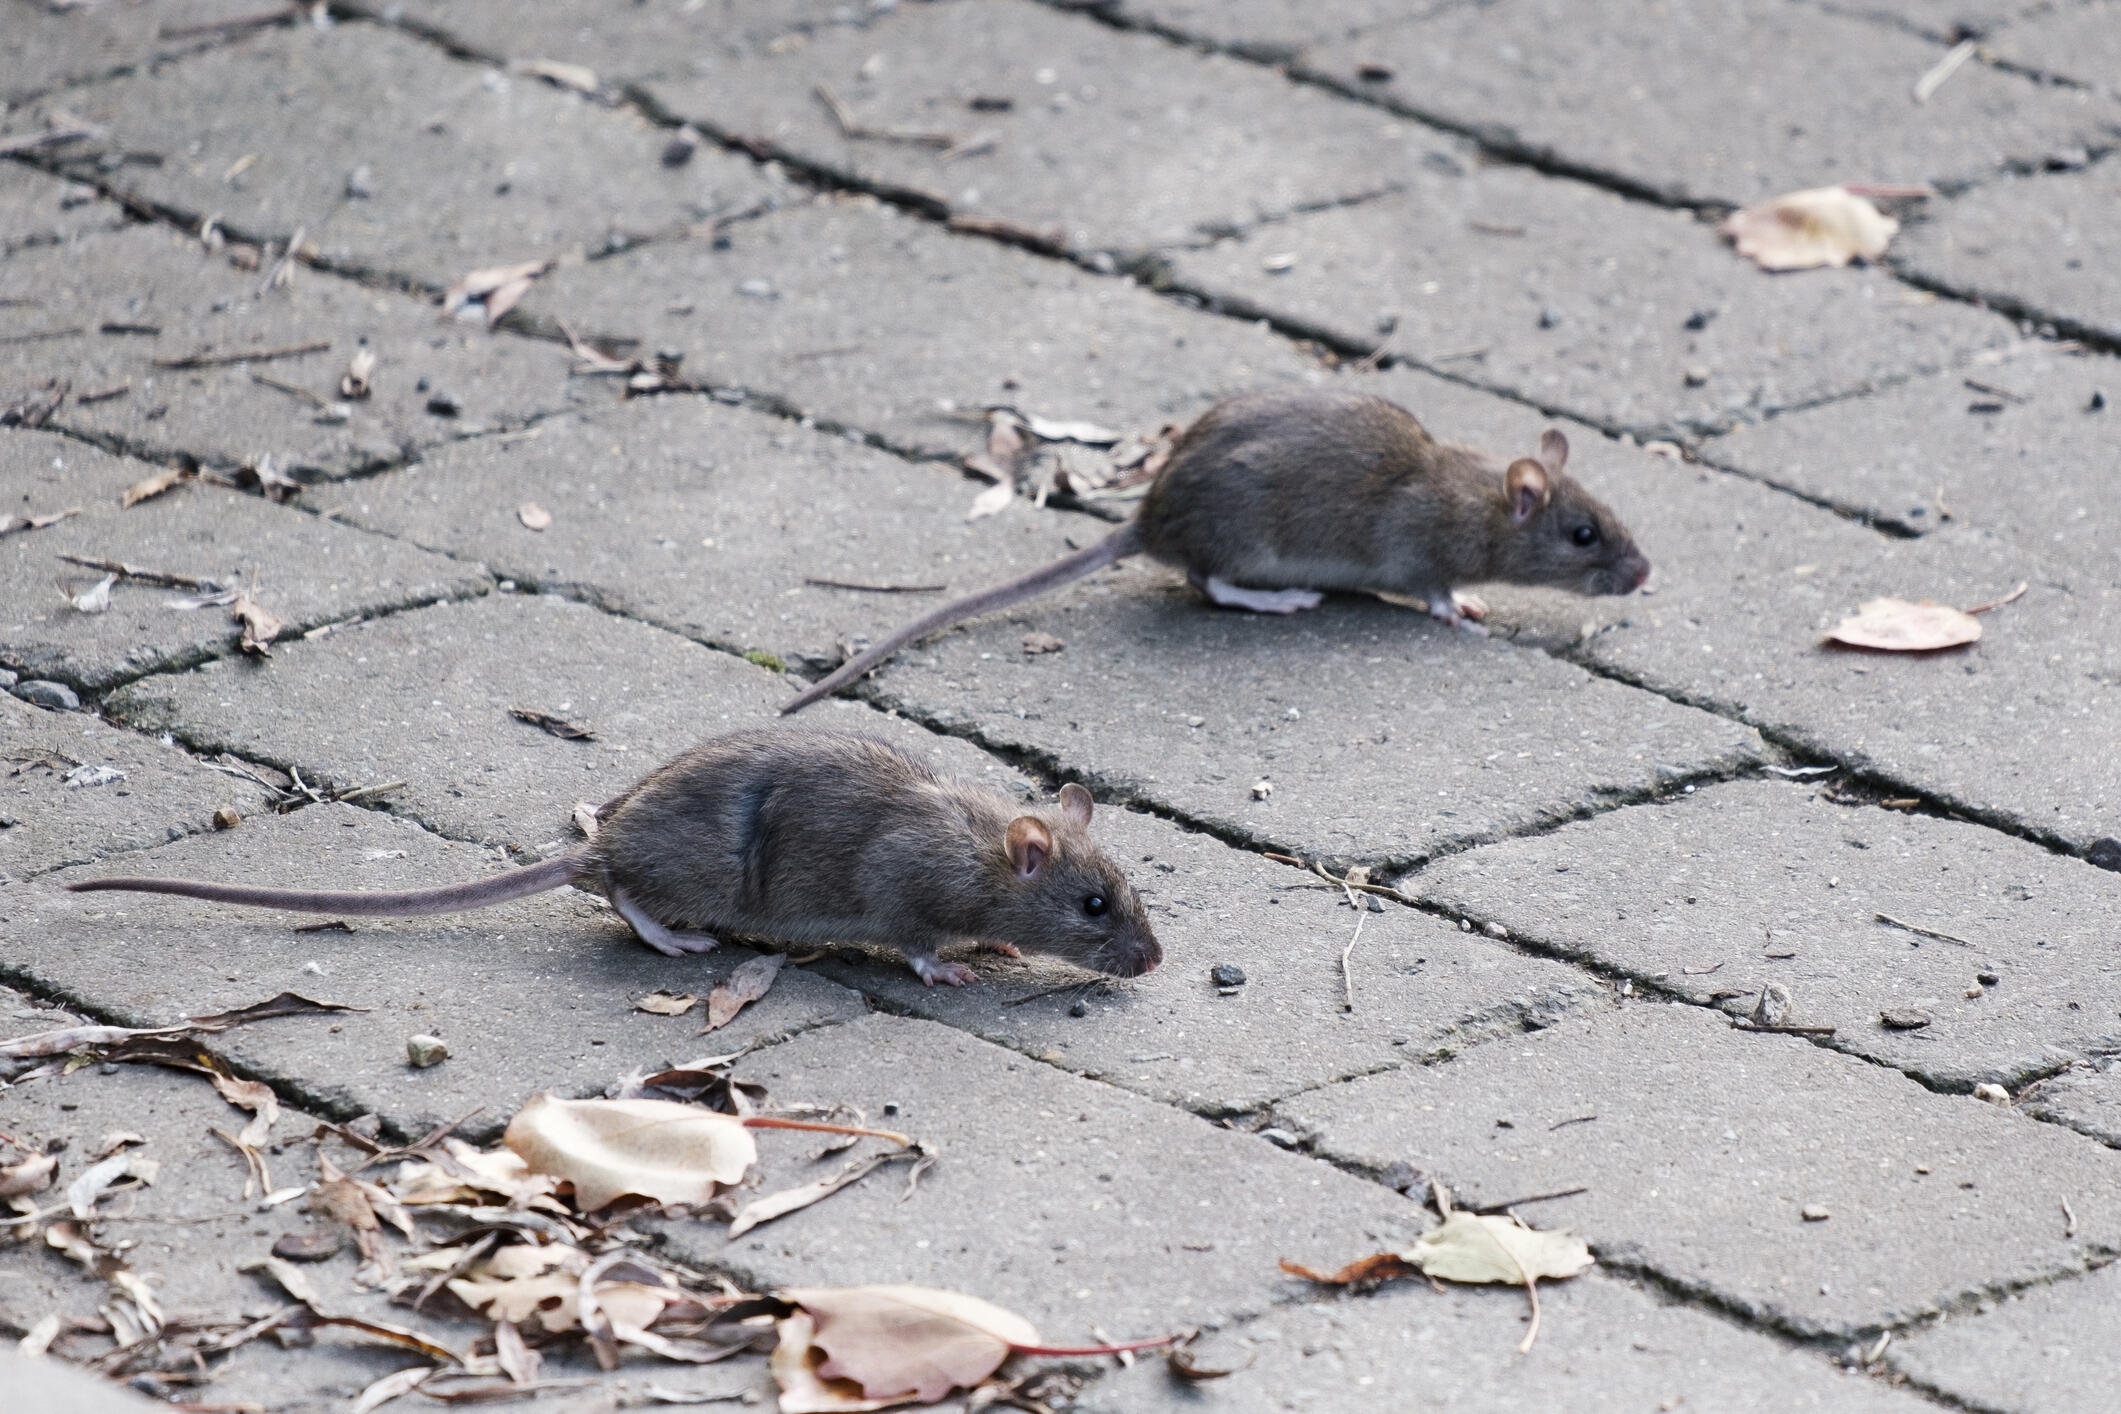 One Pennsylvania City Named Among The 'Rattiest Cities In The US' For